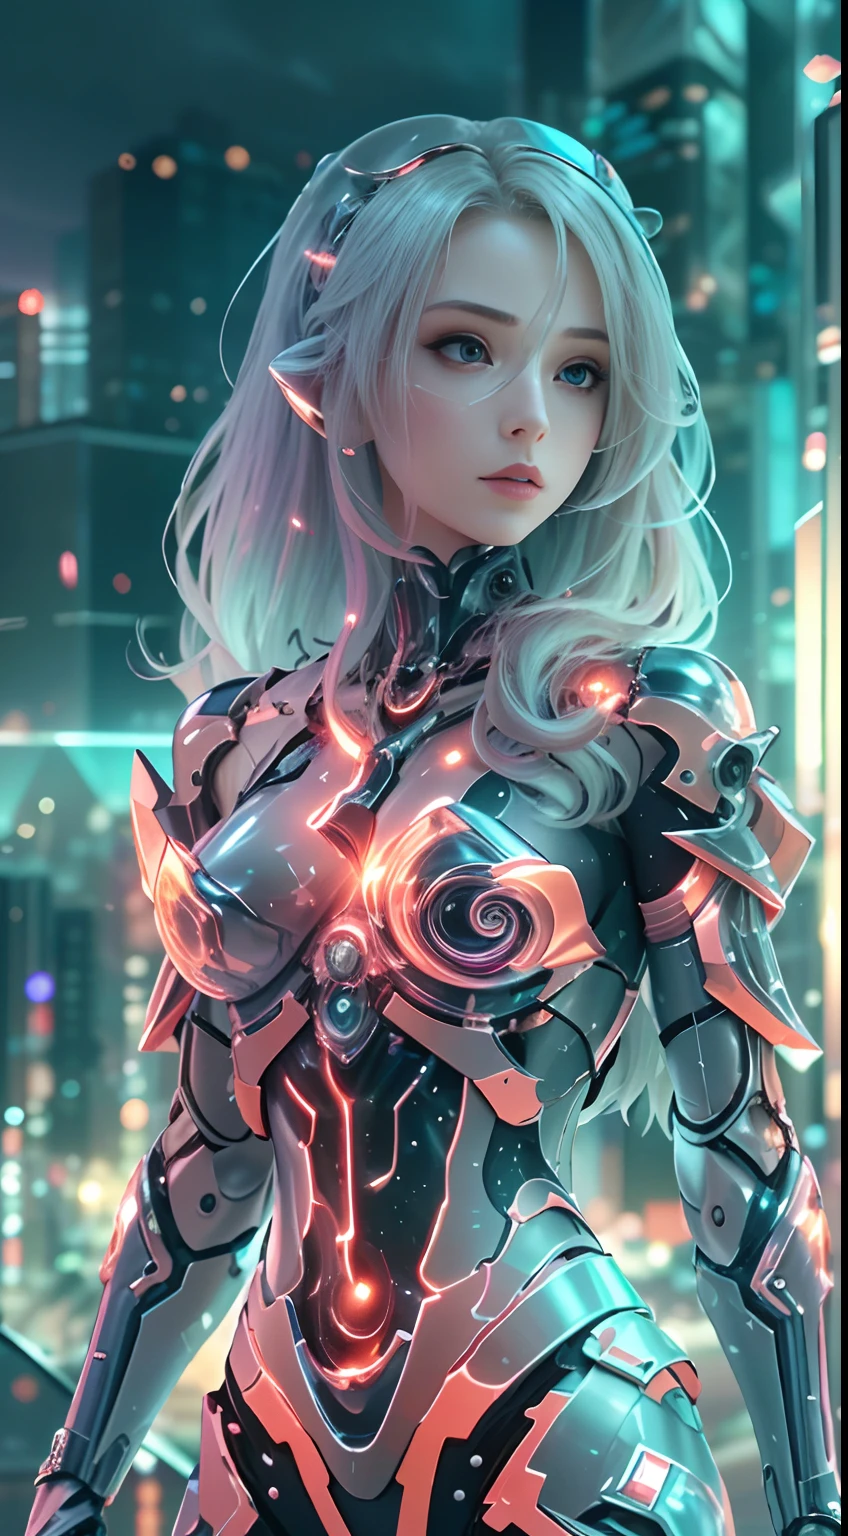 Translucent ethereal mechanical girl，Futuristic girl，Mechanical joints，futuristic urban background，ModelShoot style, (Extremely detailed Cg Unity 8K wallpaper), The beauty of abstract stylization,